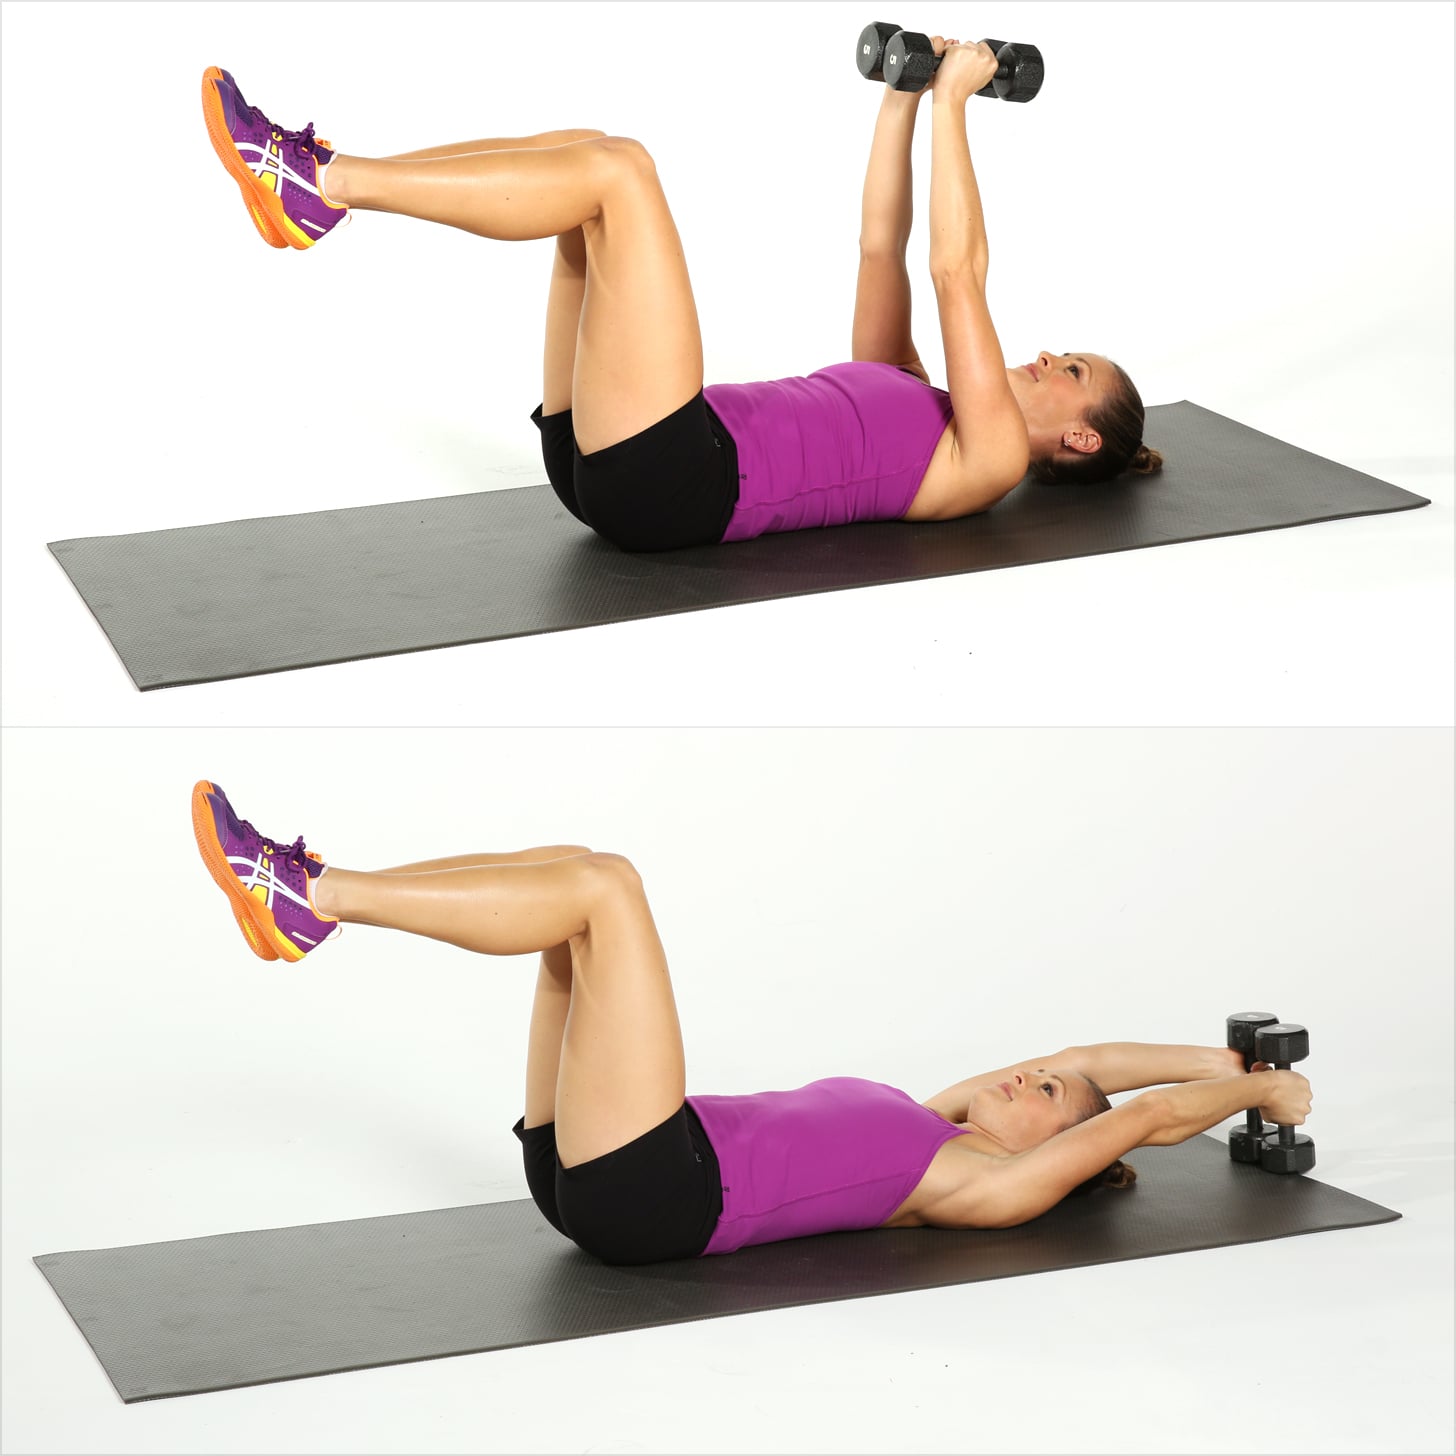 Crunches - Core Exercises for Women